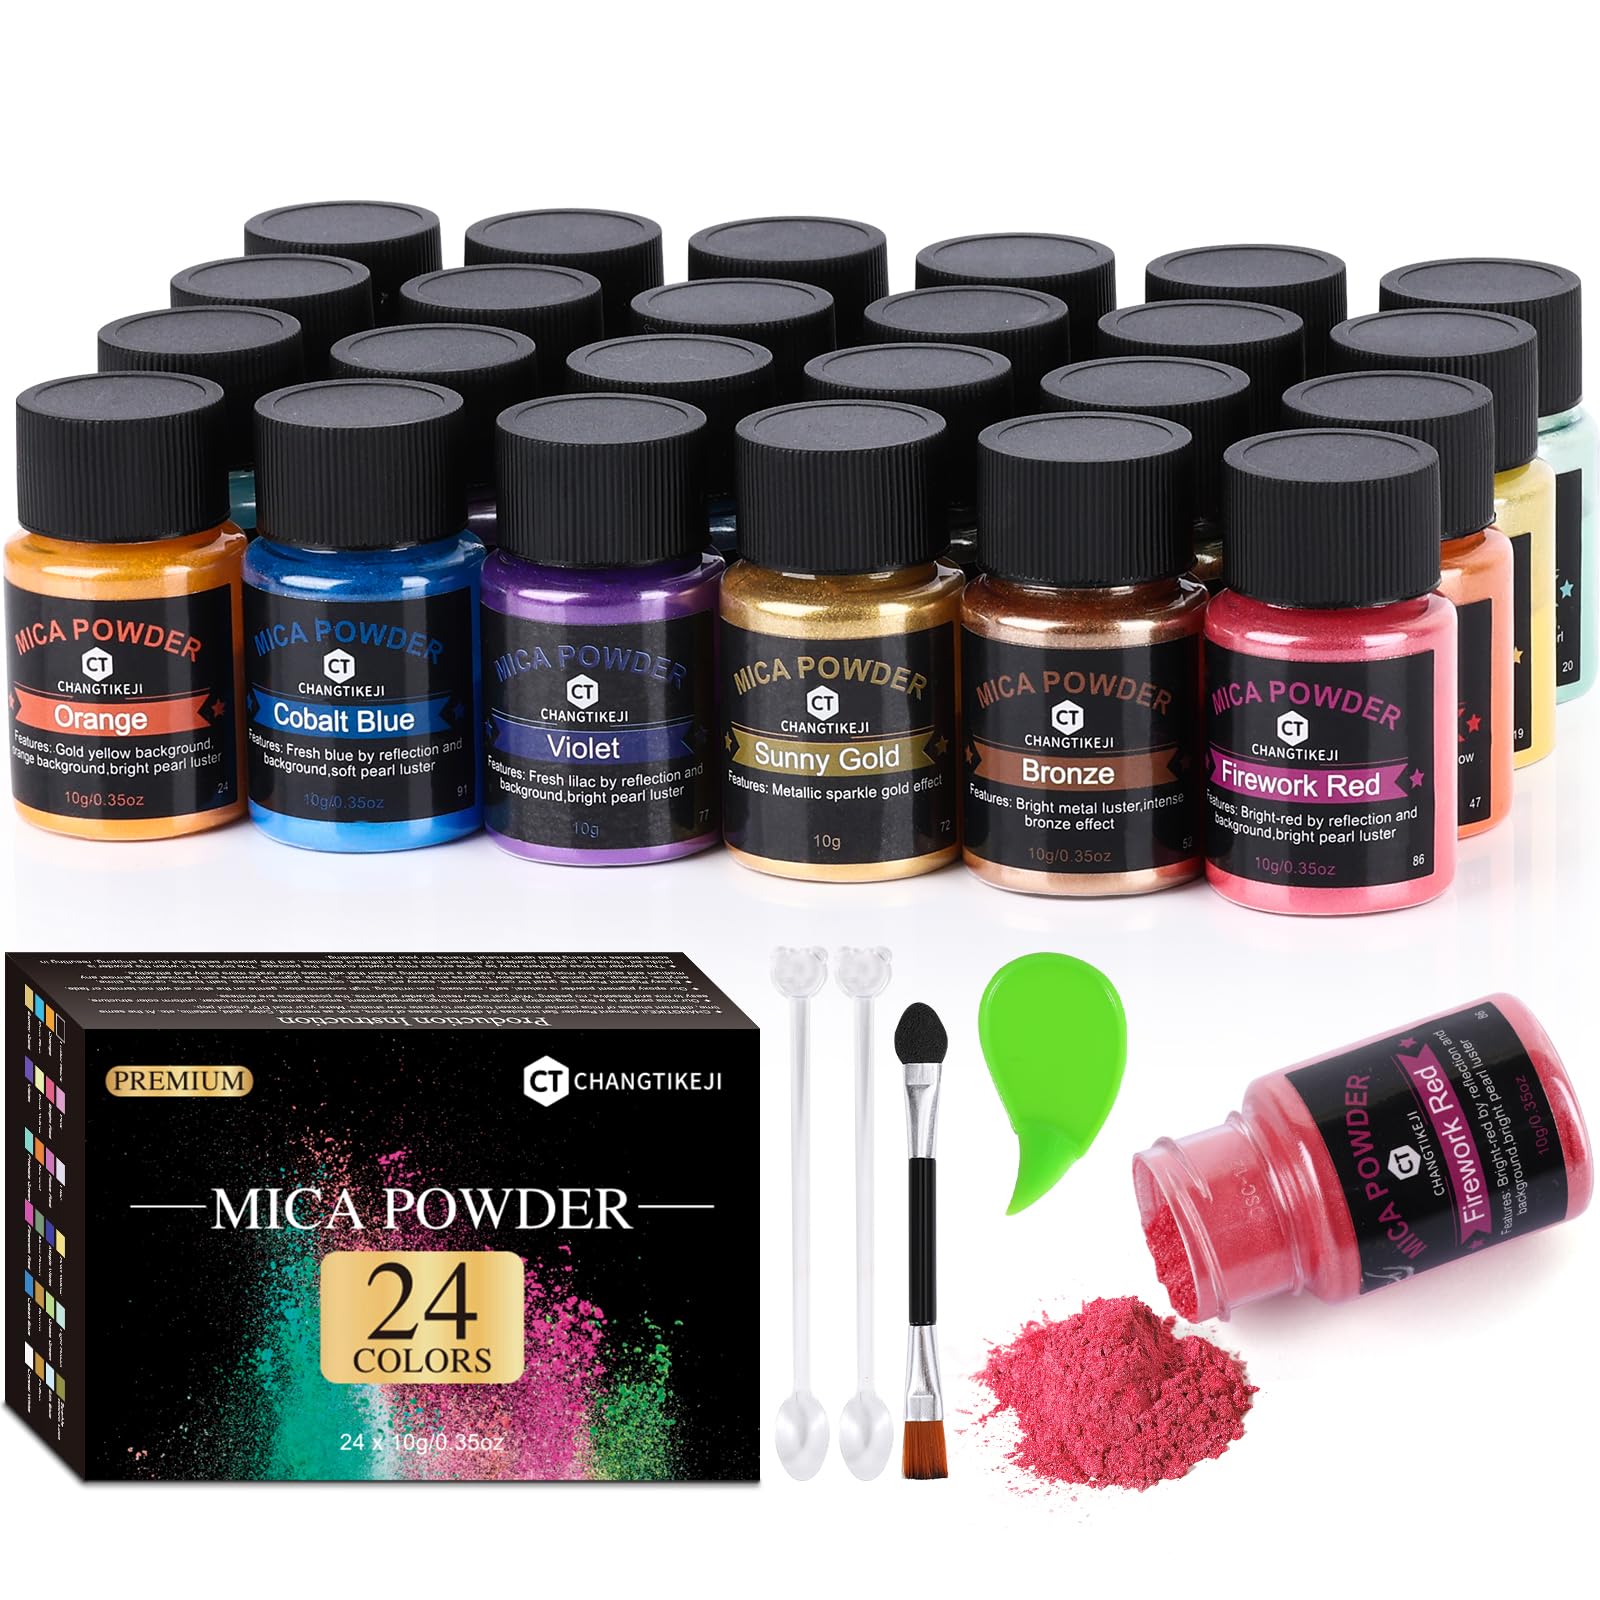 Mica Powder，63 Colors - 10g/Bottle of Natural Pigment Powder for